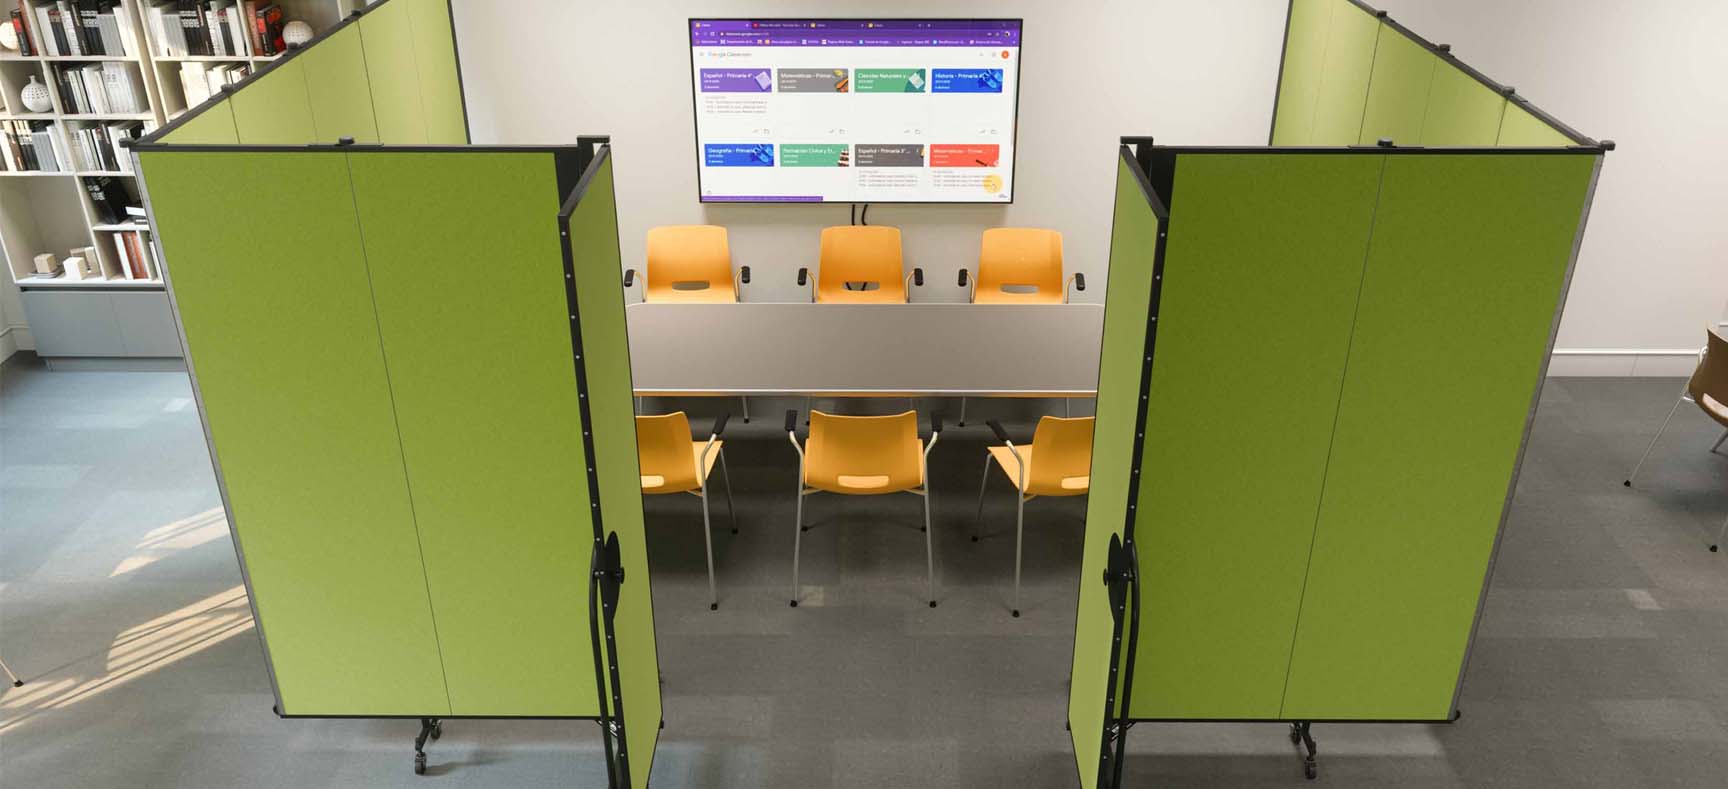 Two green room dividers partially surrounding a meeting space